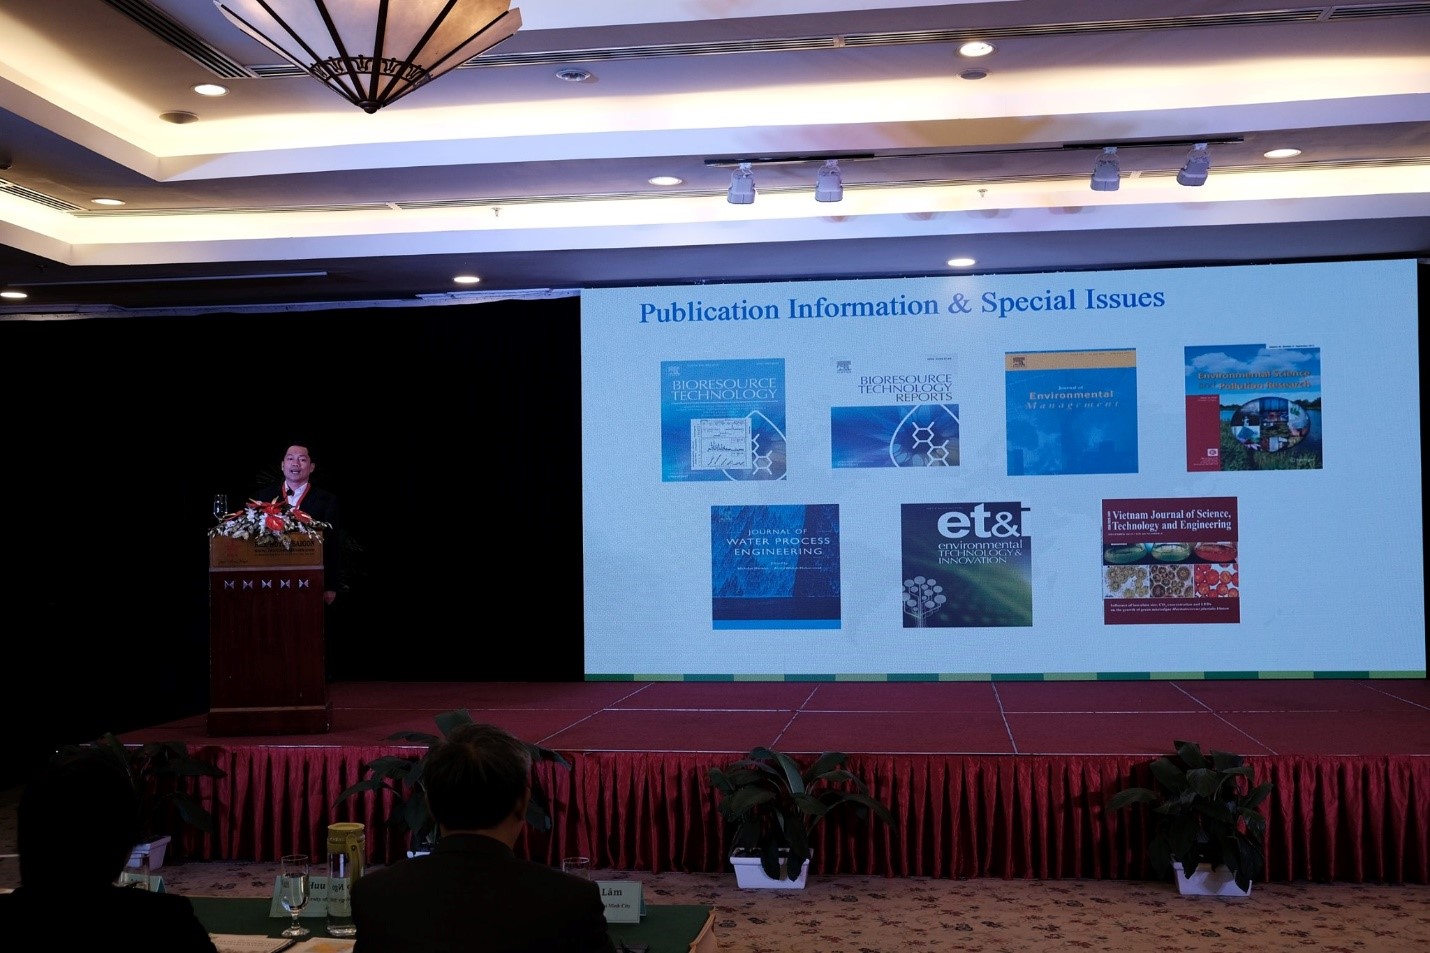 Hội thảo The 2nd Internation Conference on Green Technology and Sustainable Water 2019 (GTSW 2019) in REX hotel, Ho Chi Minh City